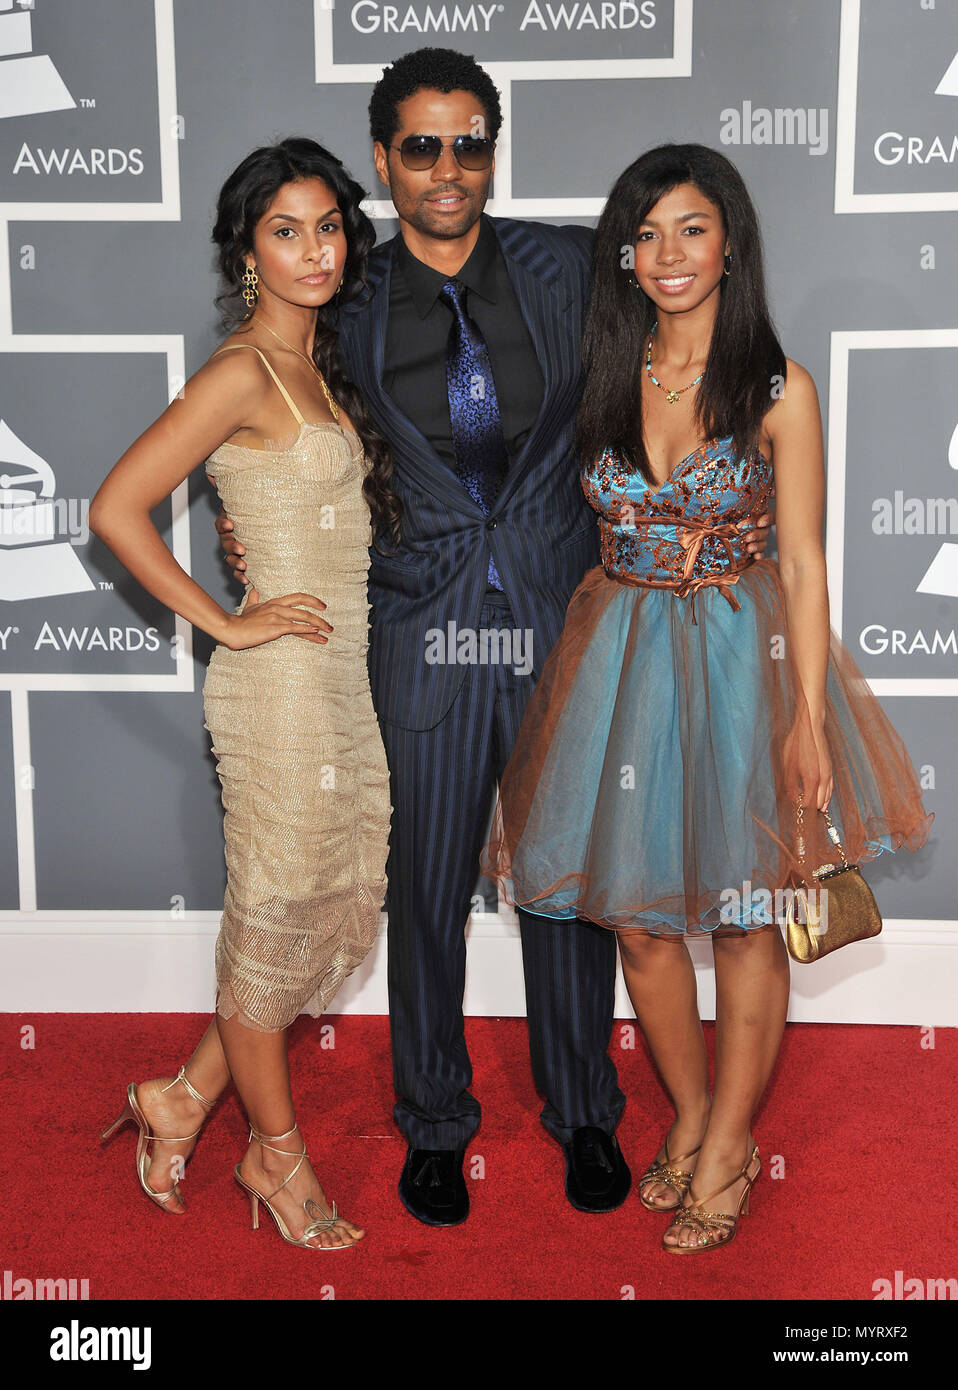 Eric Benet & Girlfriend Manuella & Daughter India- 51th Grammy Awards  2009 at the Staples center In Los Angeles.BenetEric GirlfriendManuella DaughterIndia 2304  Event in Hollywood Life - California, Red Carpet Event, USA, Film Industry, Celebrities, Photography, Bestof, Arts Culture and Entertainment, Celebrities fashion, Best of, Hollywood Life, Event in Hollywood Life - California, Red Carpet and backstage, Music celebrities, Topix, Couple, family ( husband and wife ) and kids- Children, brothers and sisters inquiry tsuni@Gamma-USA.com, Credit Tsuni / USA, 2006 to 2009 Stock Photo